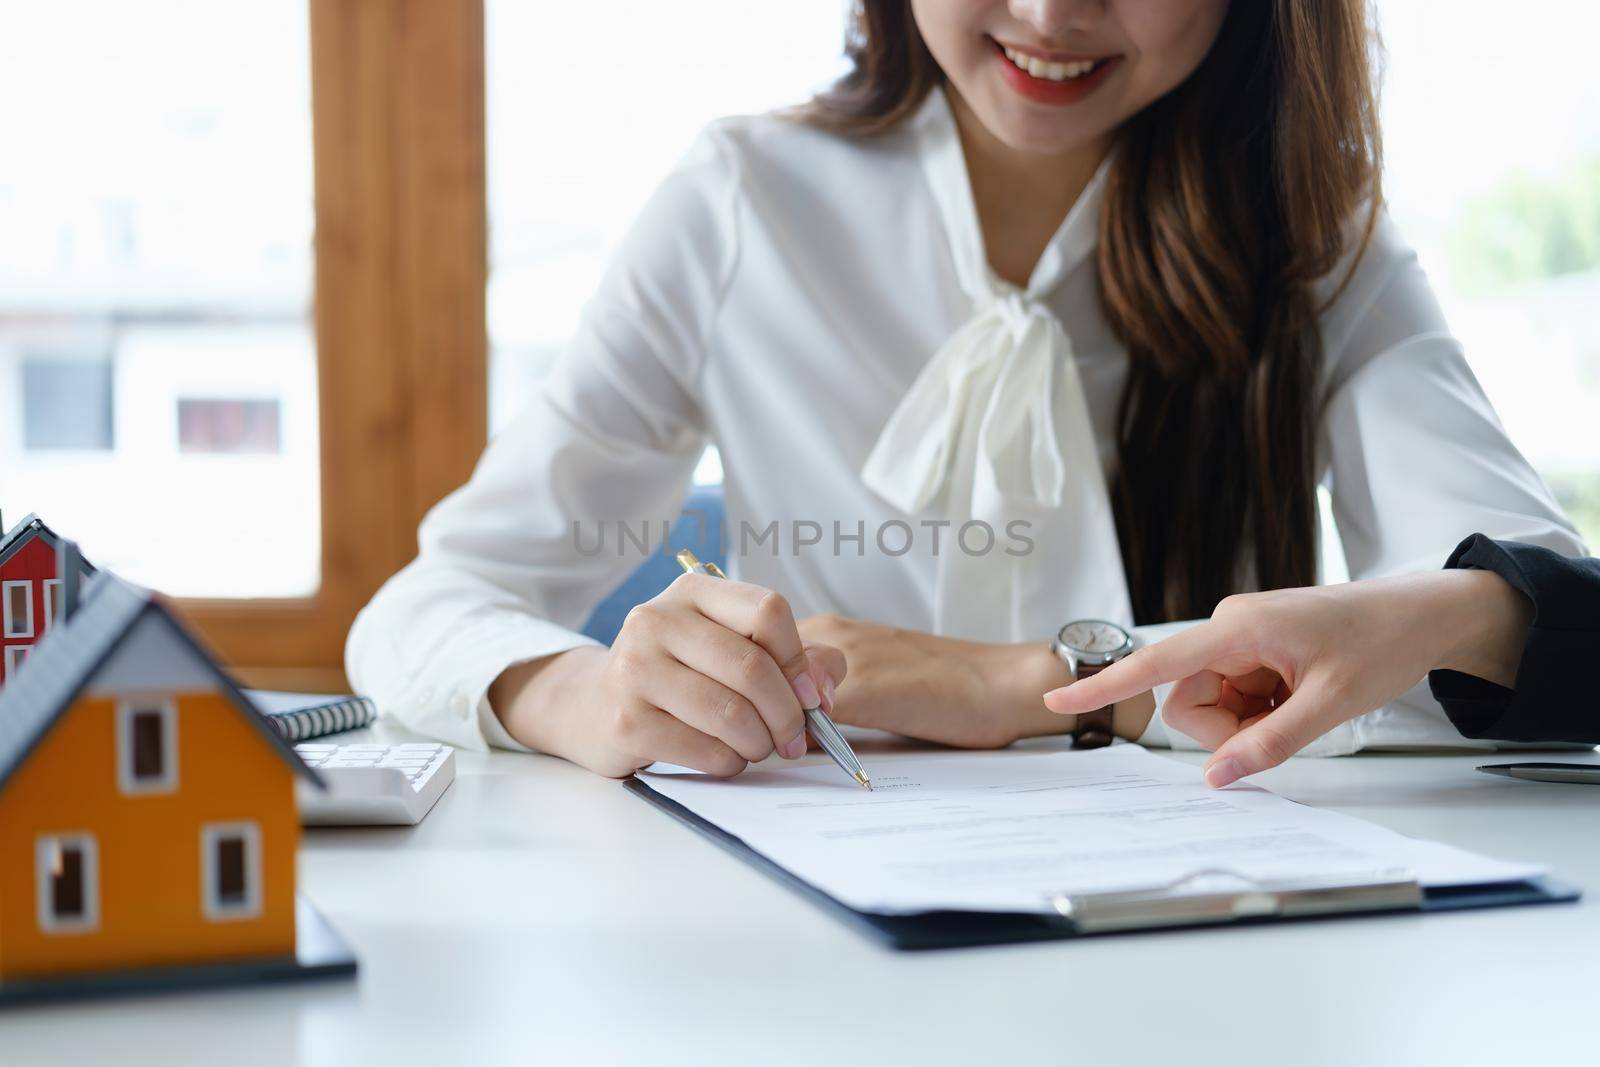 Guarantee, mortgage, agreement, contract, sign, the customer is signing the contract document as evidence to the real estate agent or bank officer according to the agreement according to the document by Manastrong